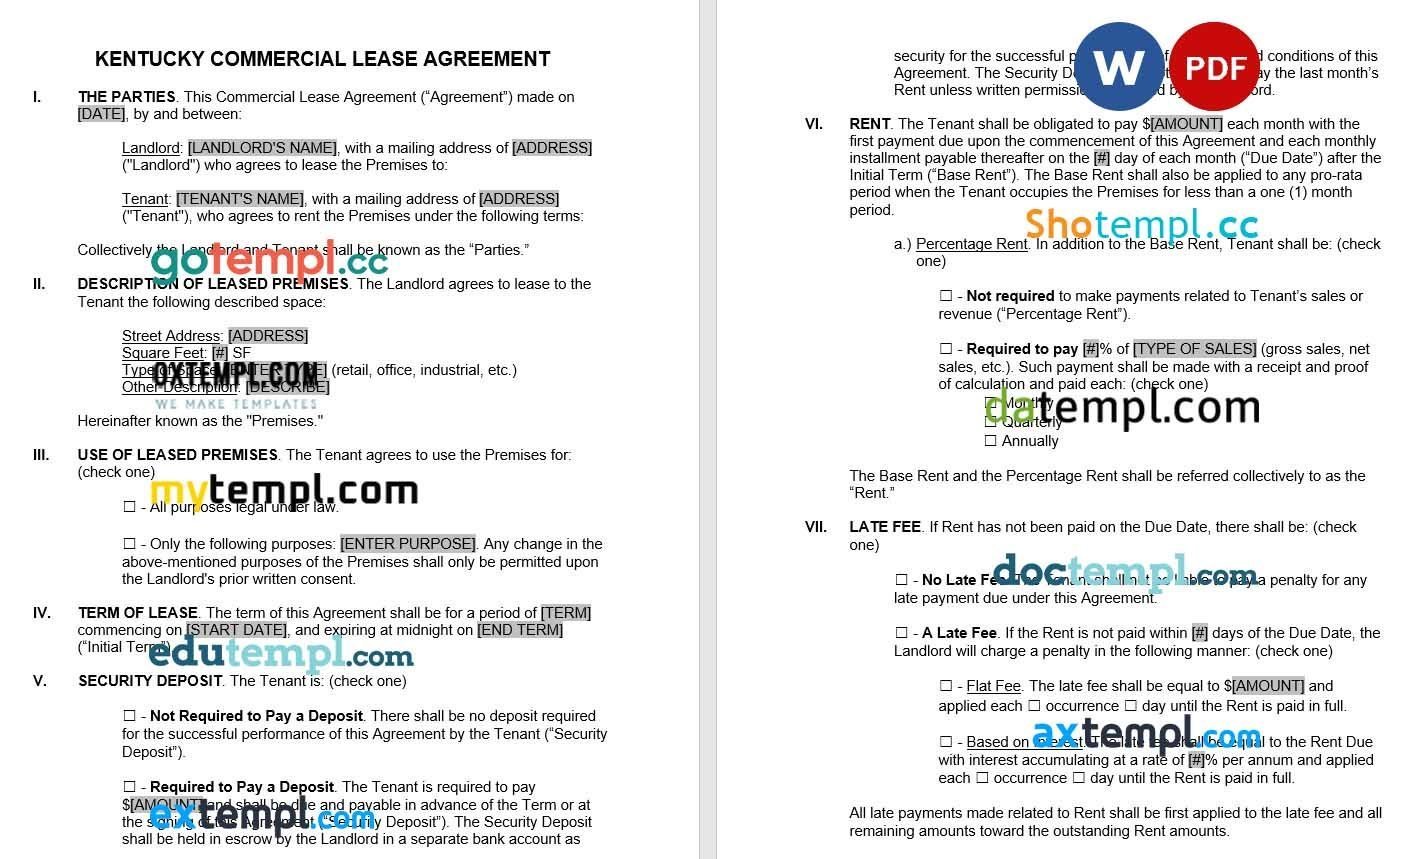 Kentucky Commercial Lease Agreement Word example, fully editable